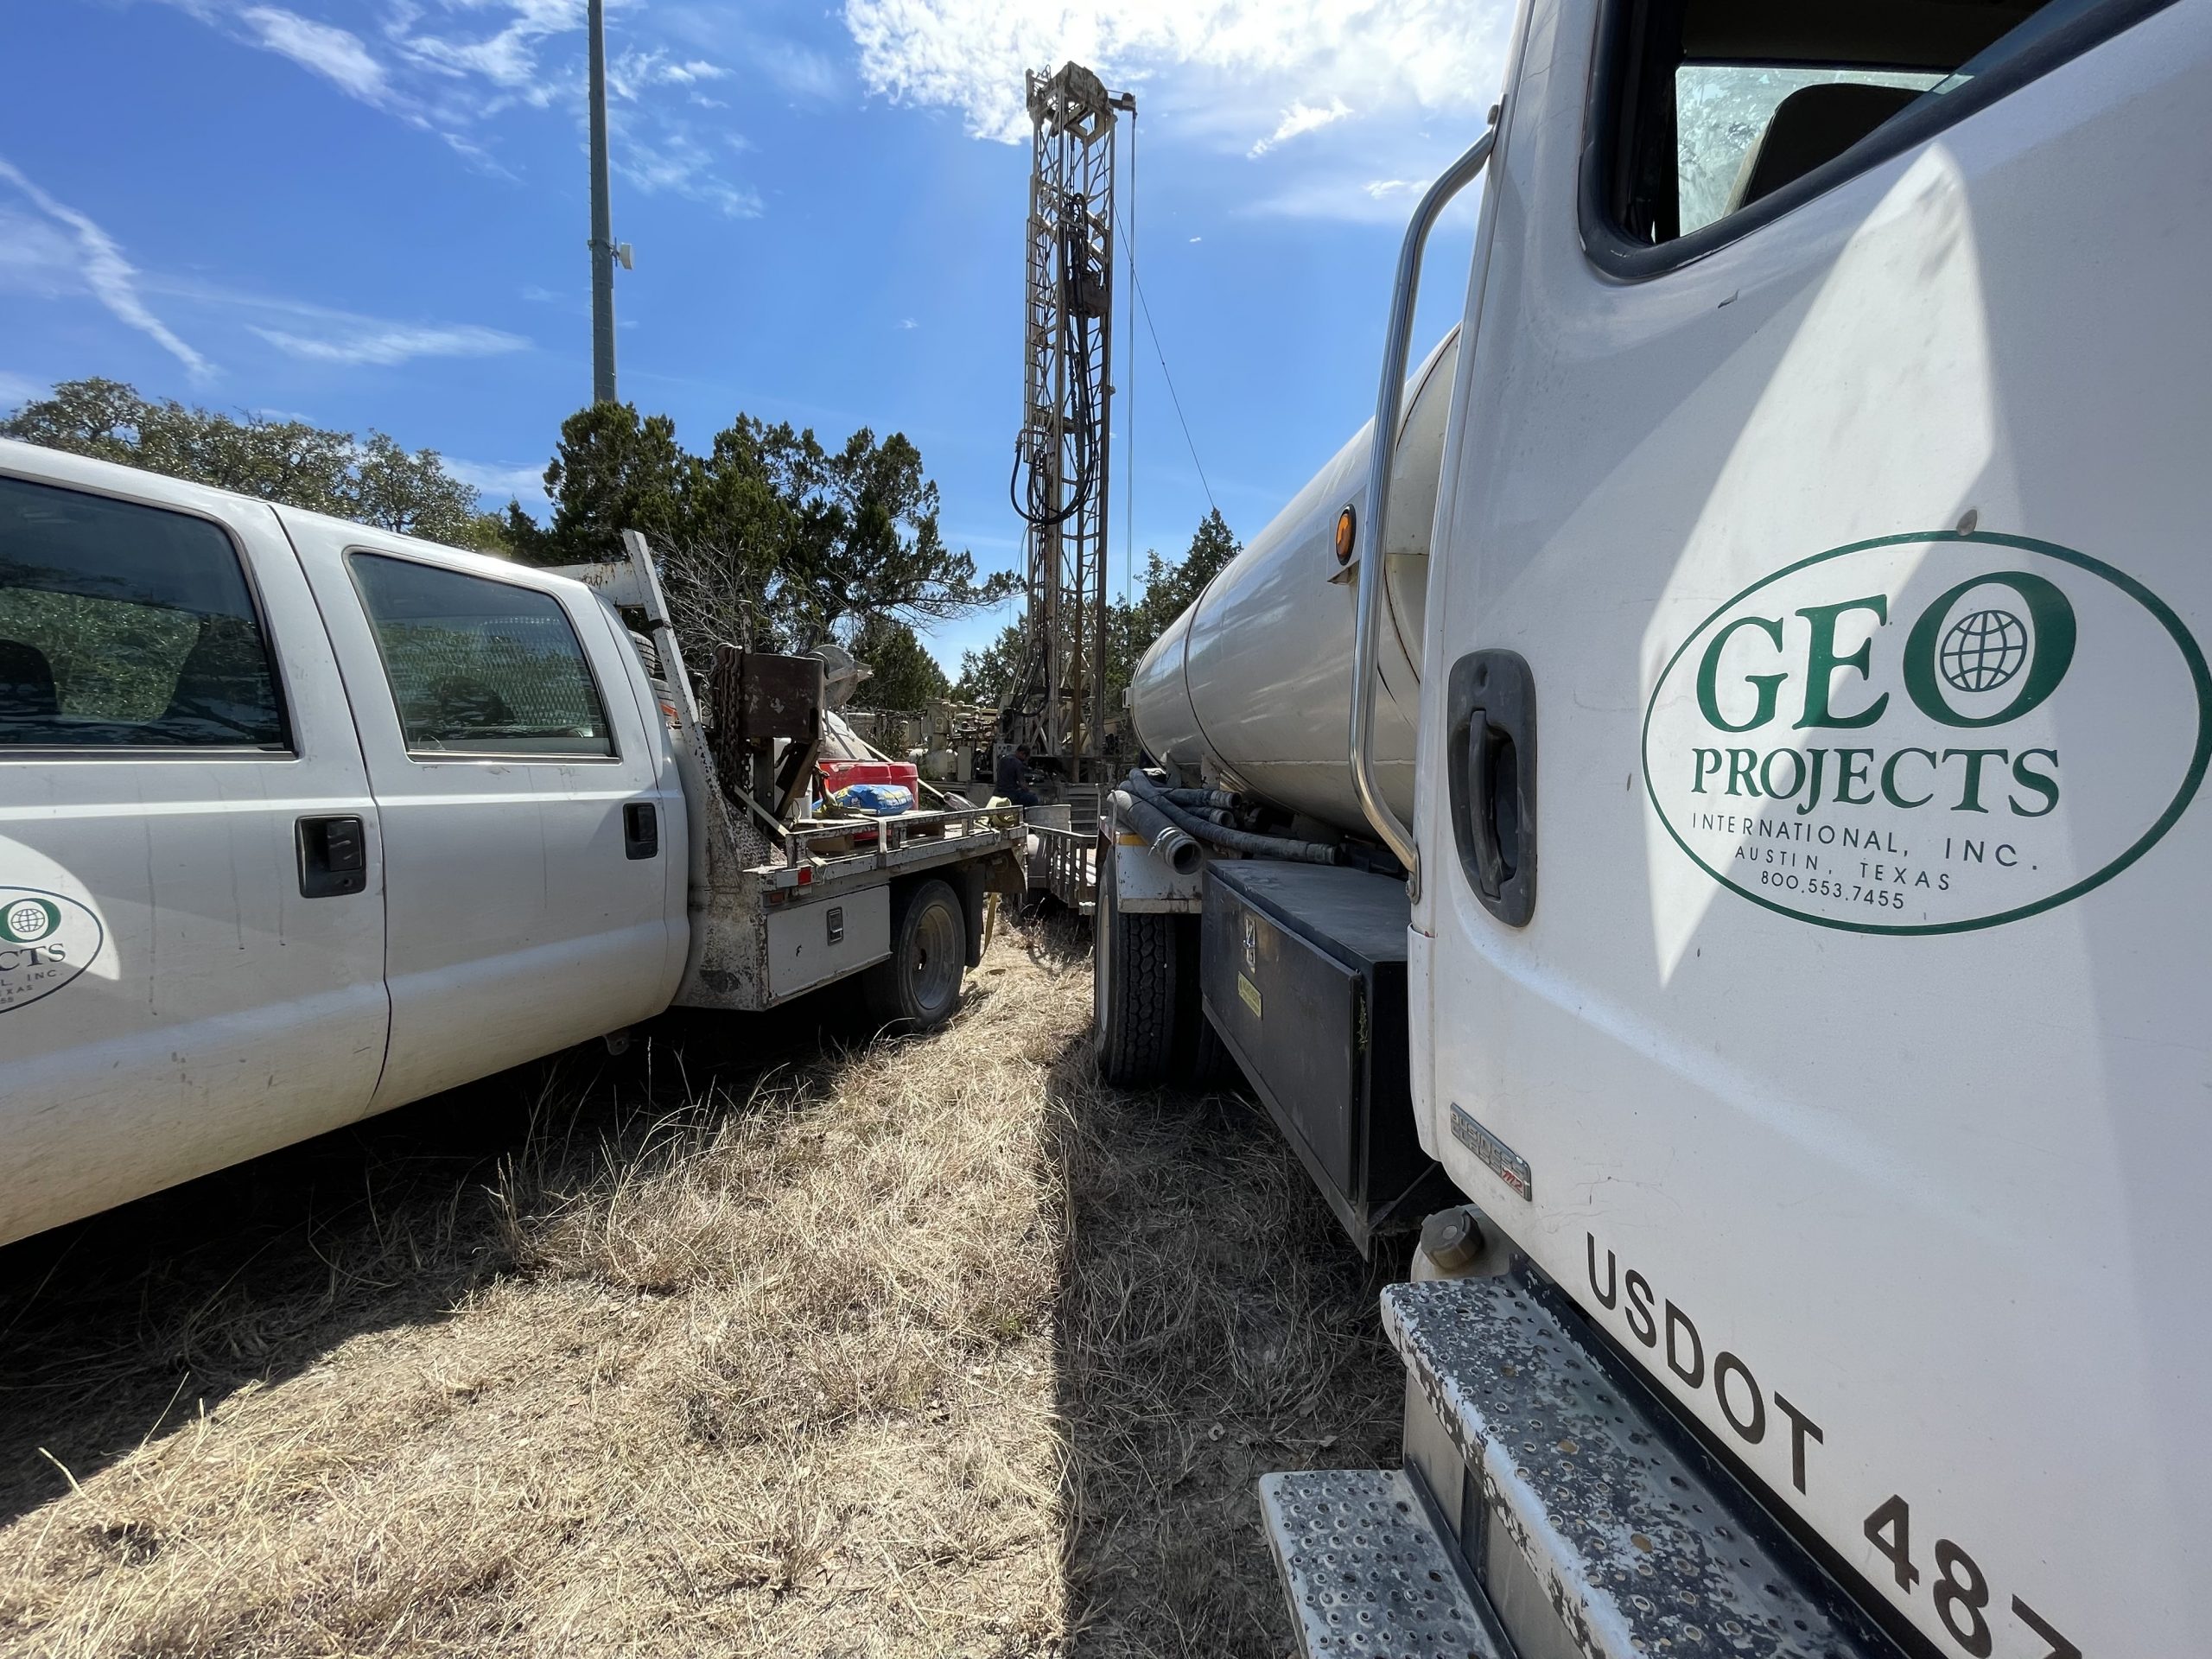 Two new monitor wells for the Jacob's Well Groundwater Management Zone